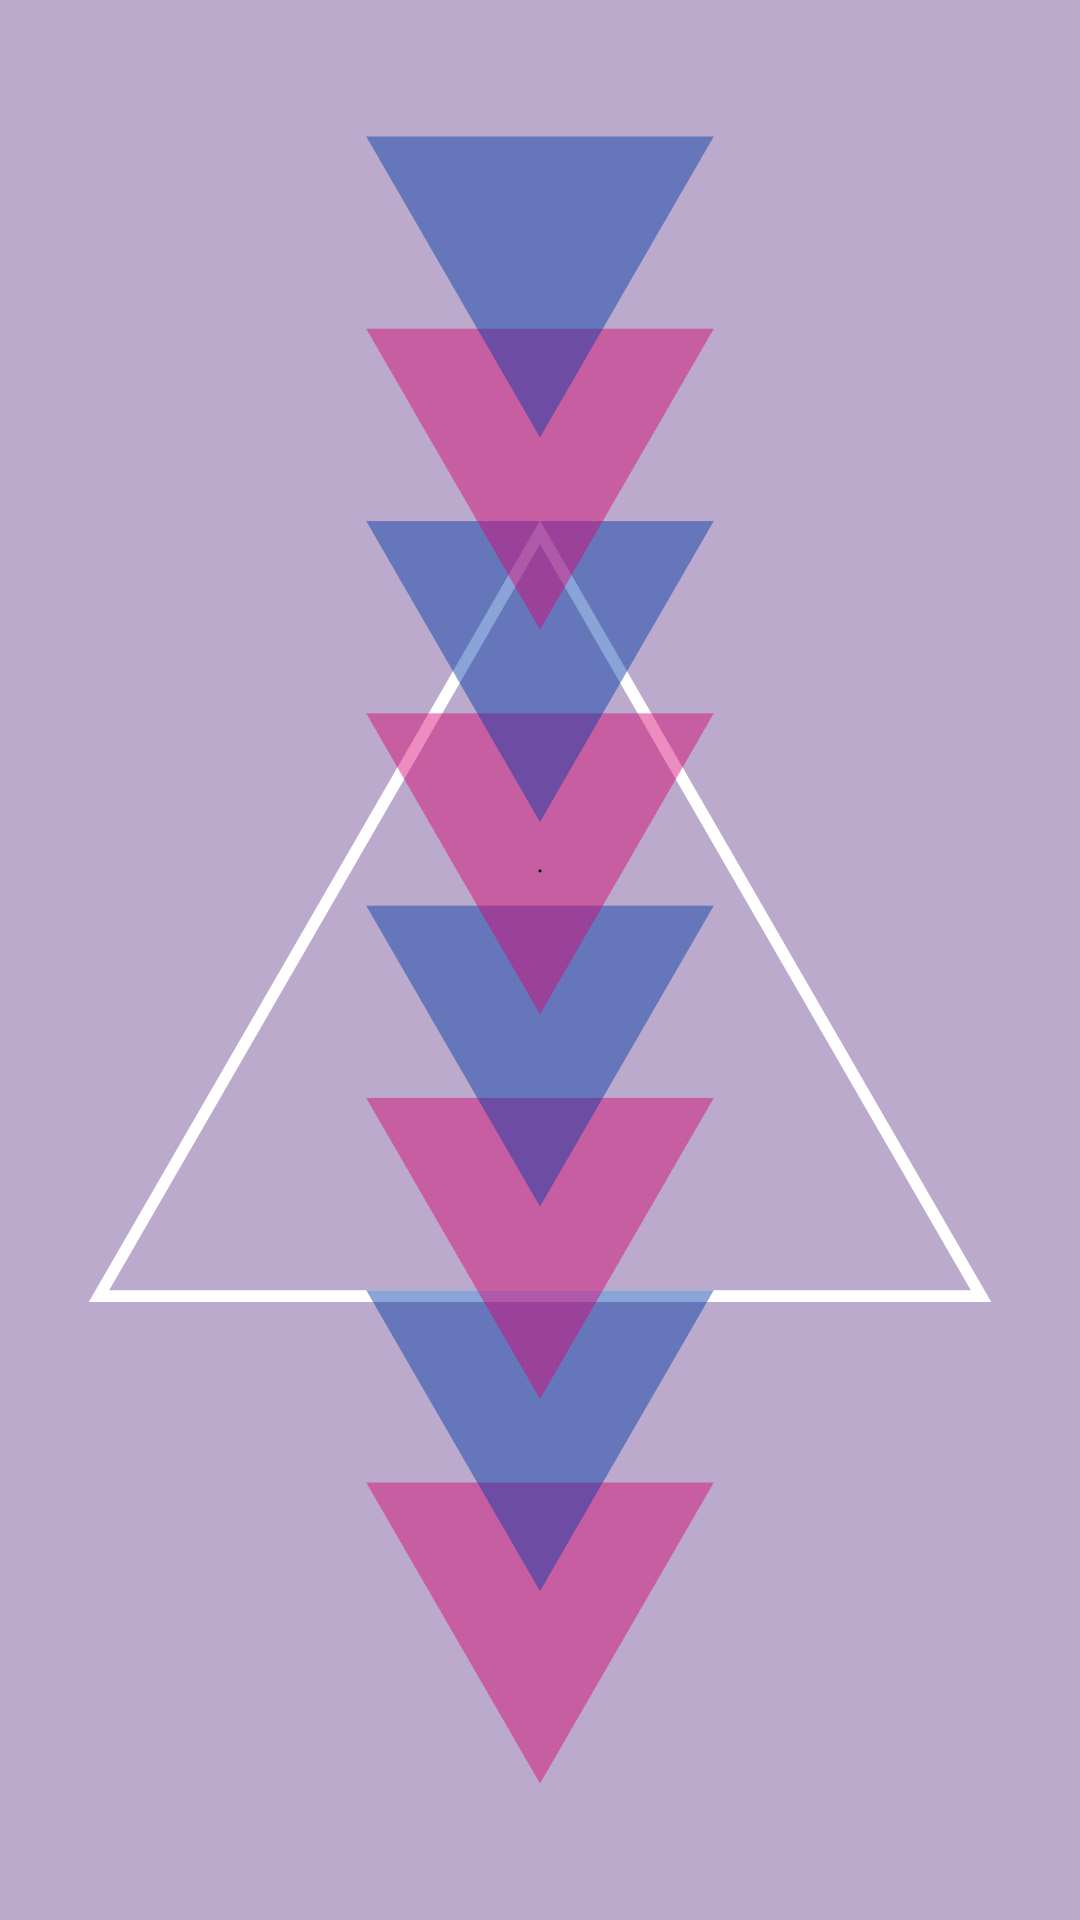 Purple and pink triangles arranged in a vertical column with white lines connecting them - Bisexual